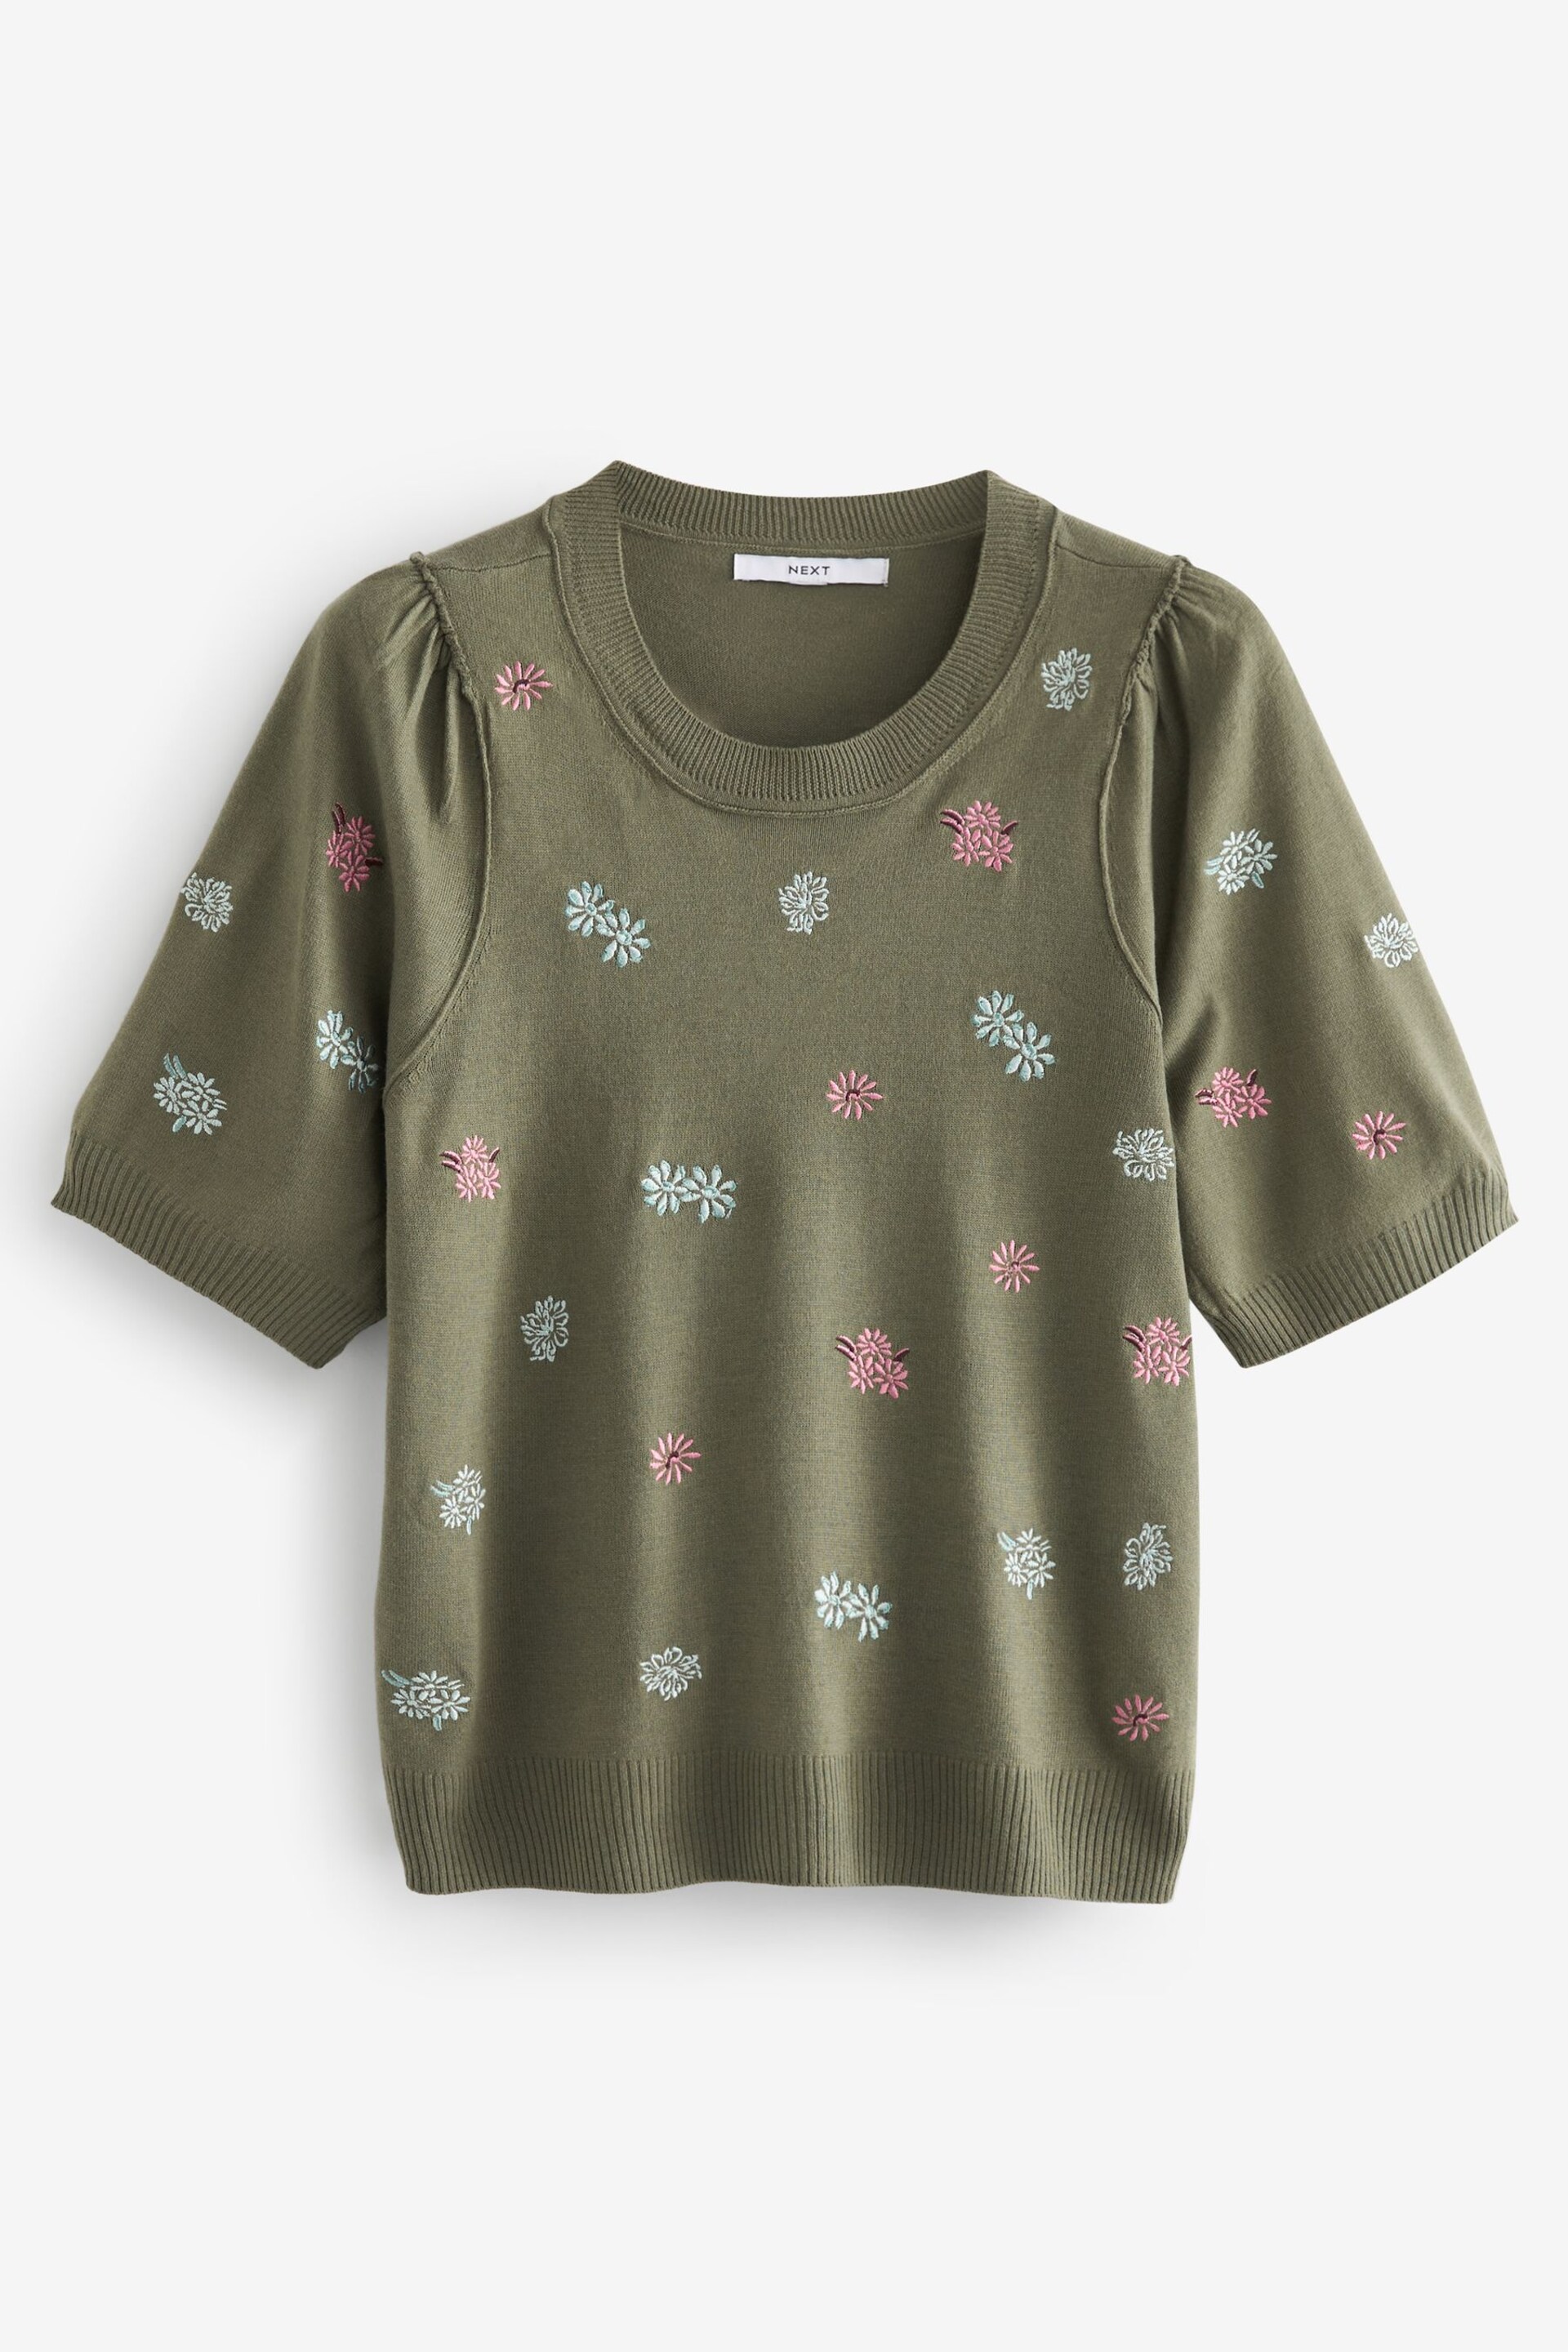 Khaki Green Floral Embroidery Printed Crew Neck Short Sleeve Knitted Top - Image 4 of 5